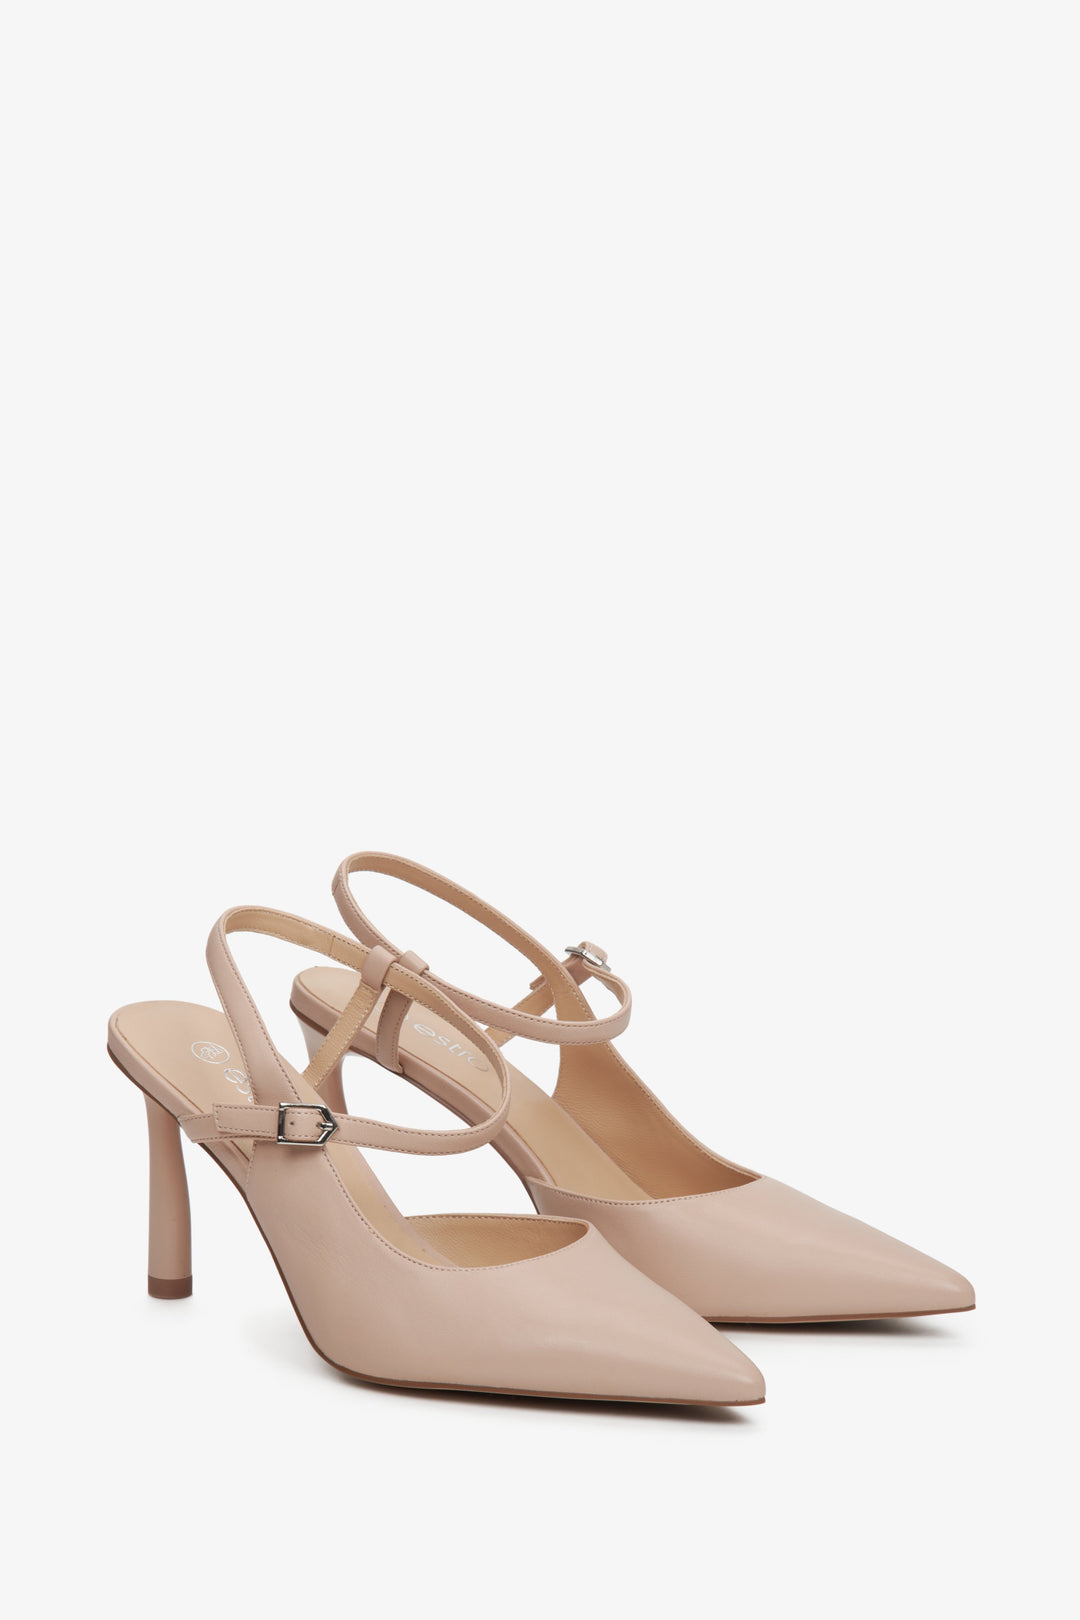 High heeled women's slingback shoes with a pointed toe in beige.